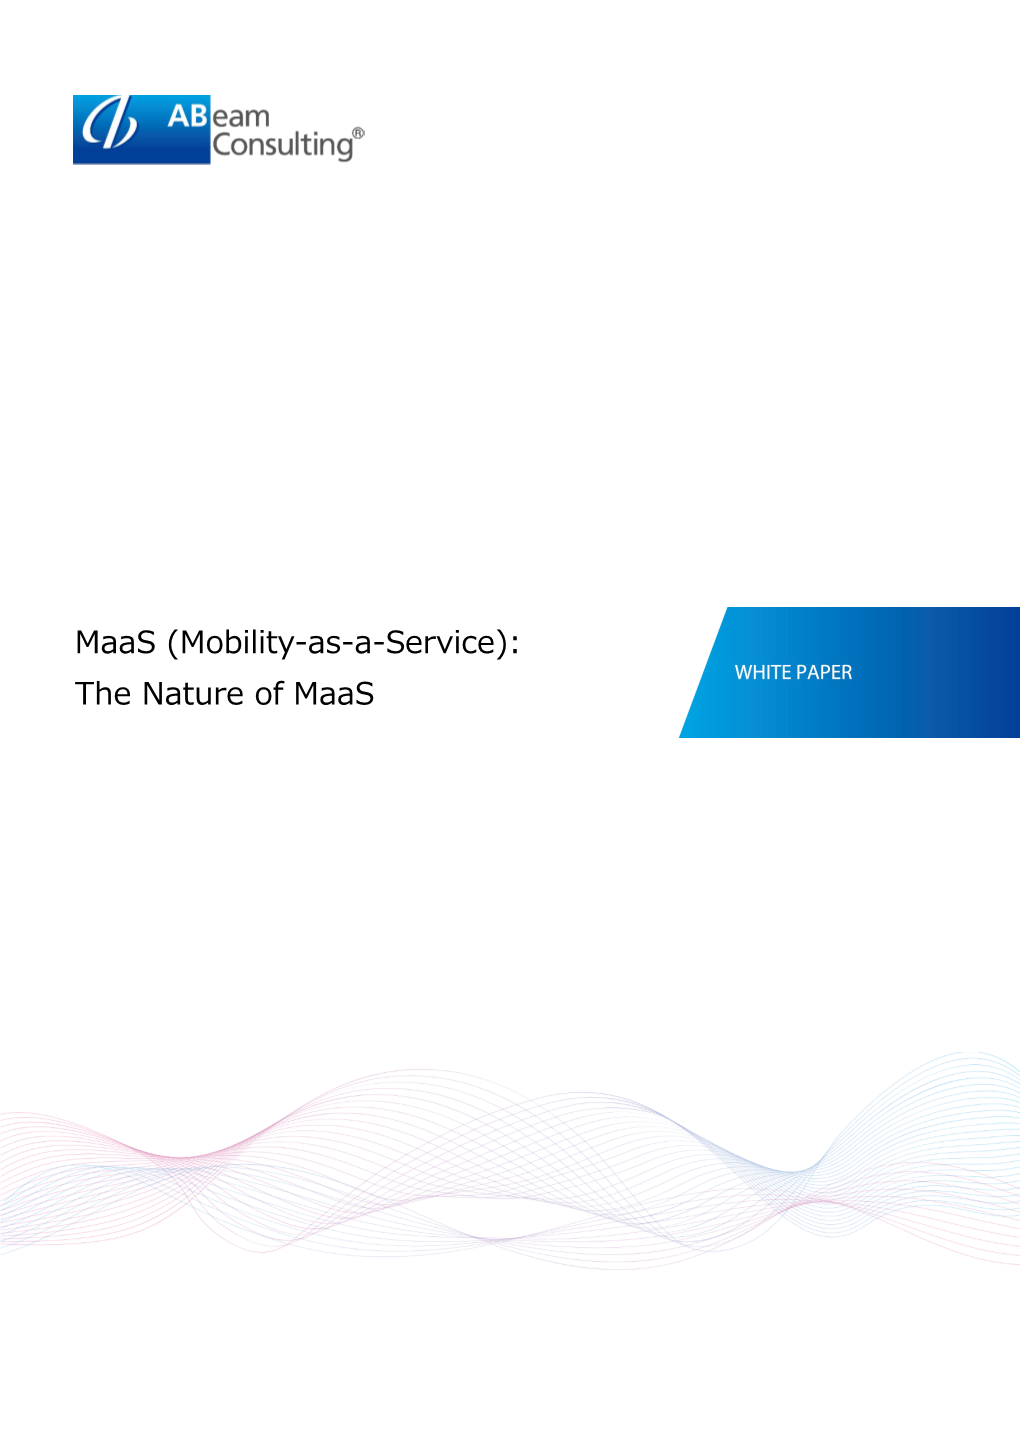 Maas (Mobility-As-A-Service): the Nature of Maas